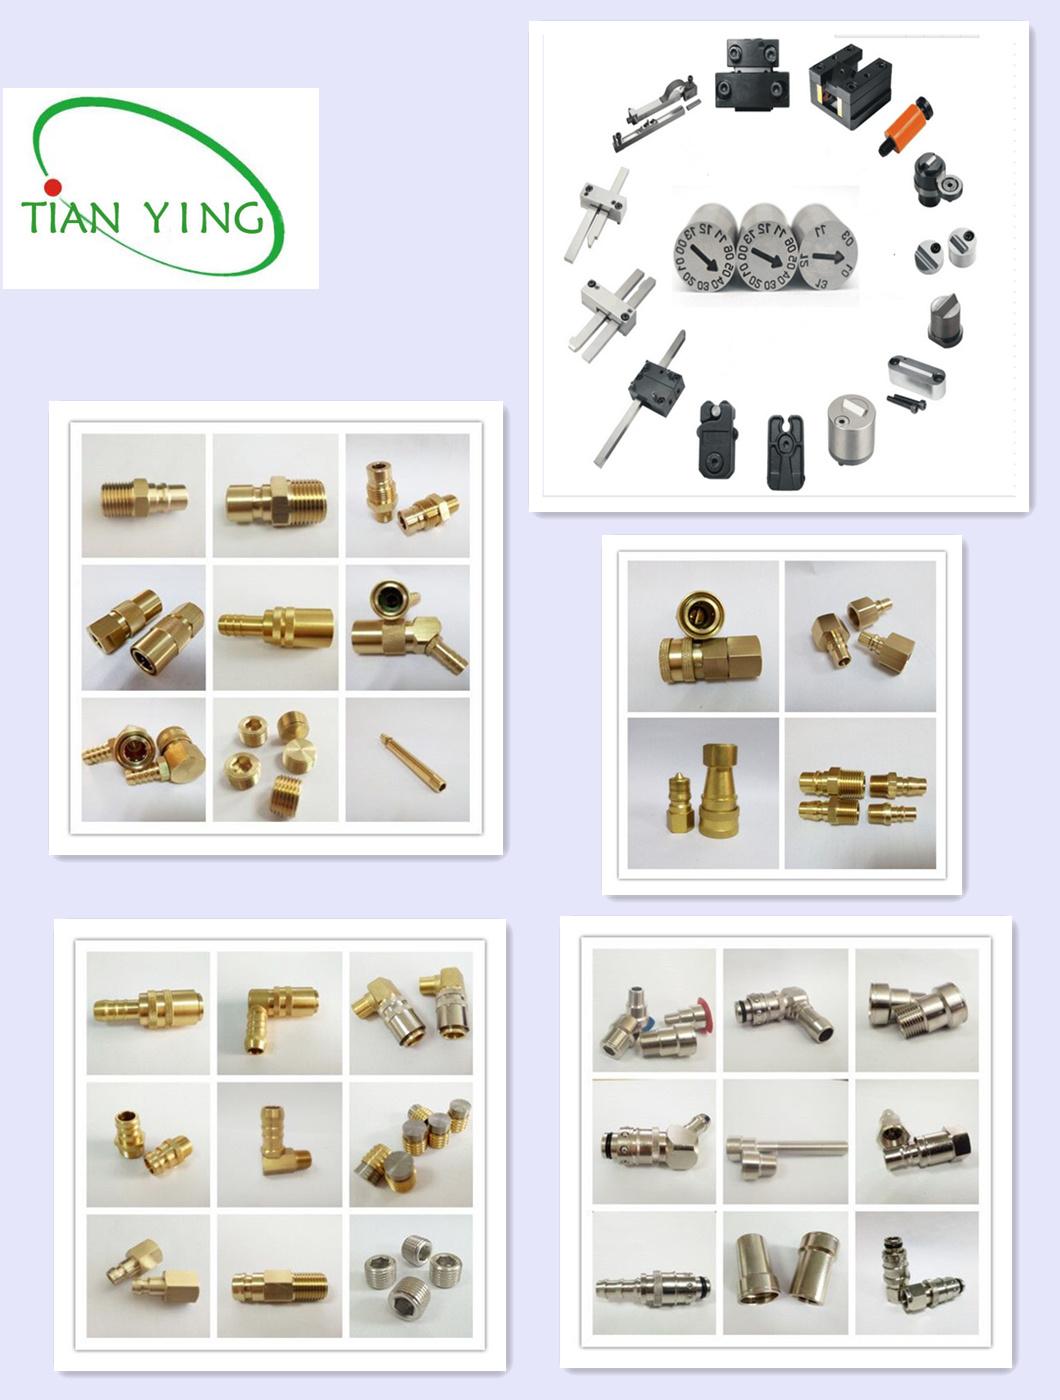 Taiwan Standard Mold Air Poppet Valve of Mold Parts